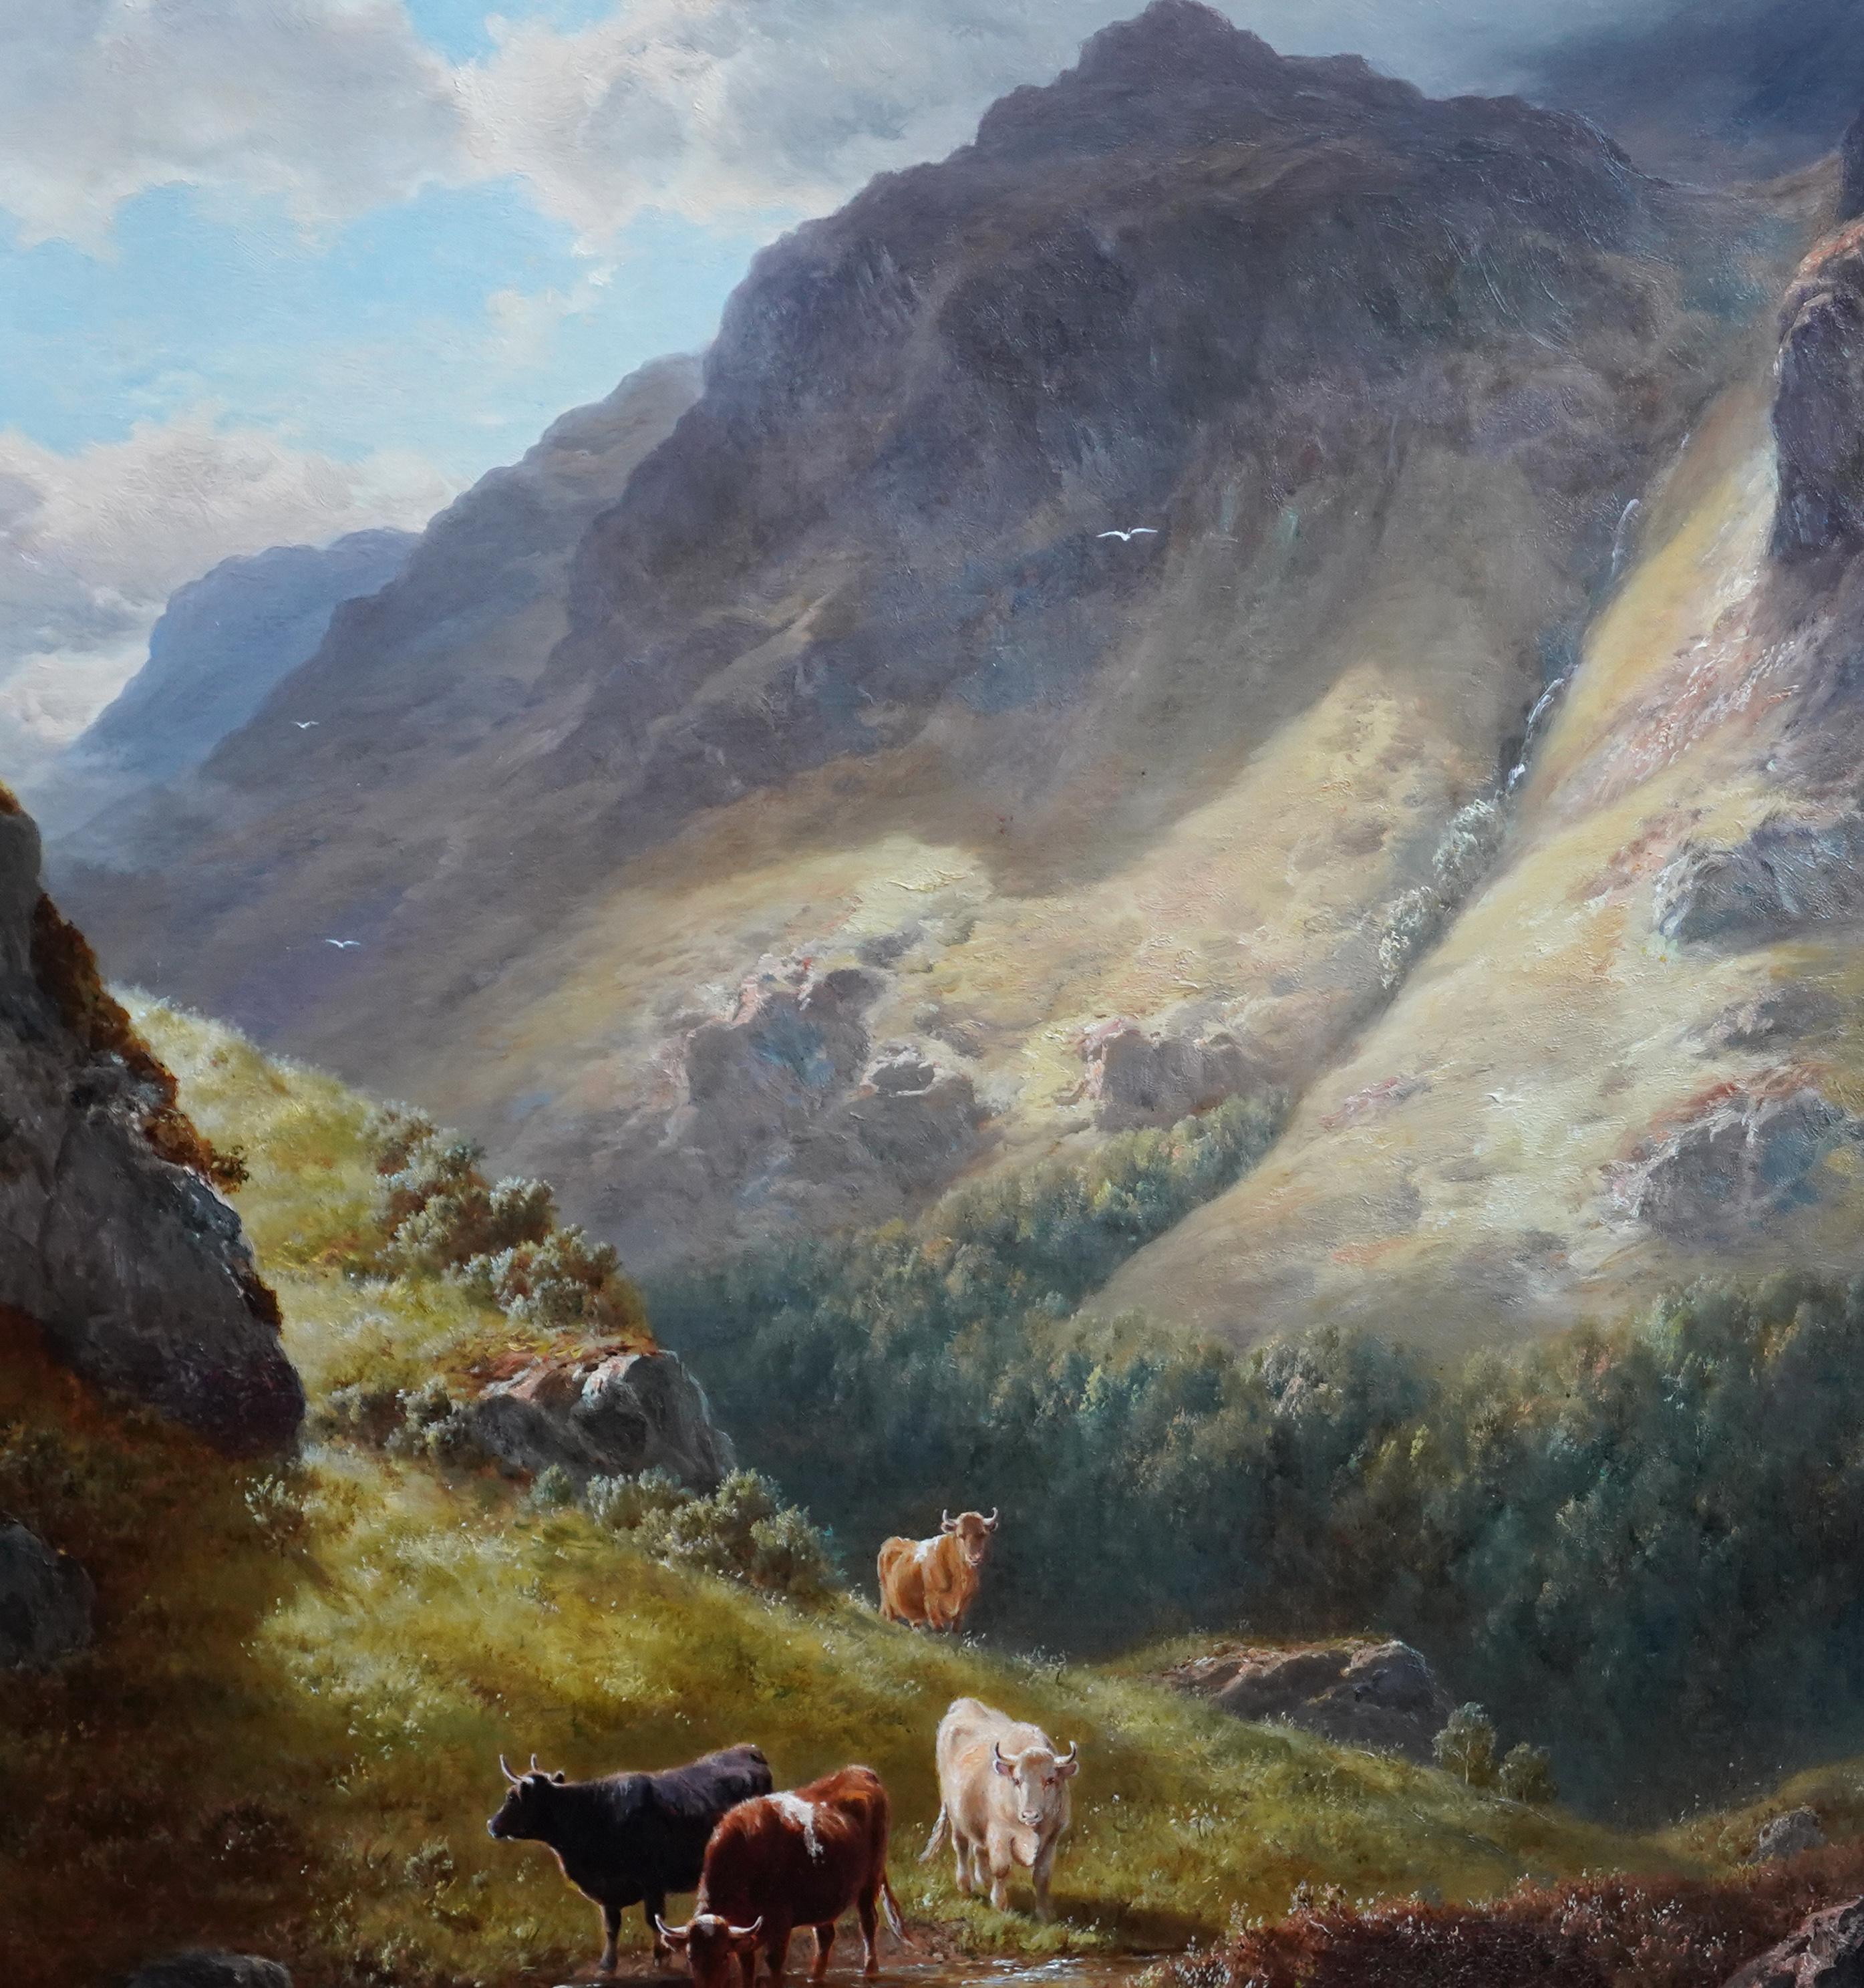 This lovely British Victorian landscape oil painting is by artist William M Davies. It was painted in 1898 and the location is Gate Crag Borrowdale, in Cumberland in the Lake District. In the foreground are several different coloured cattle by a